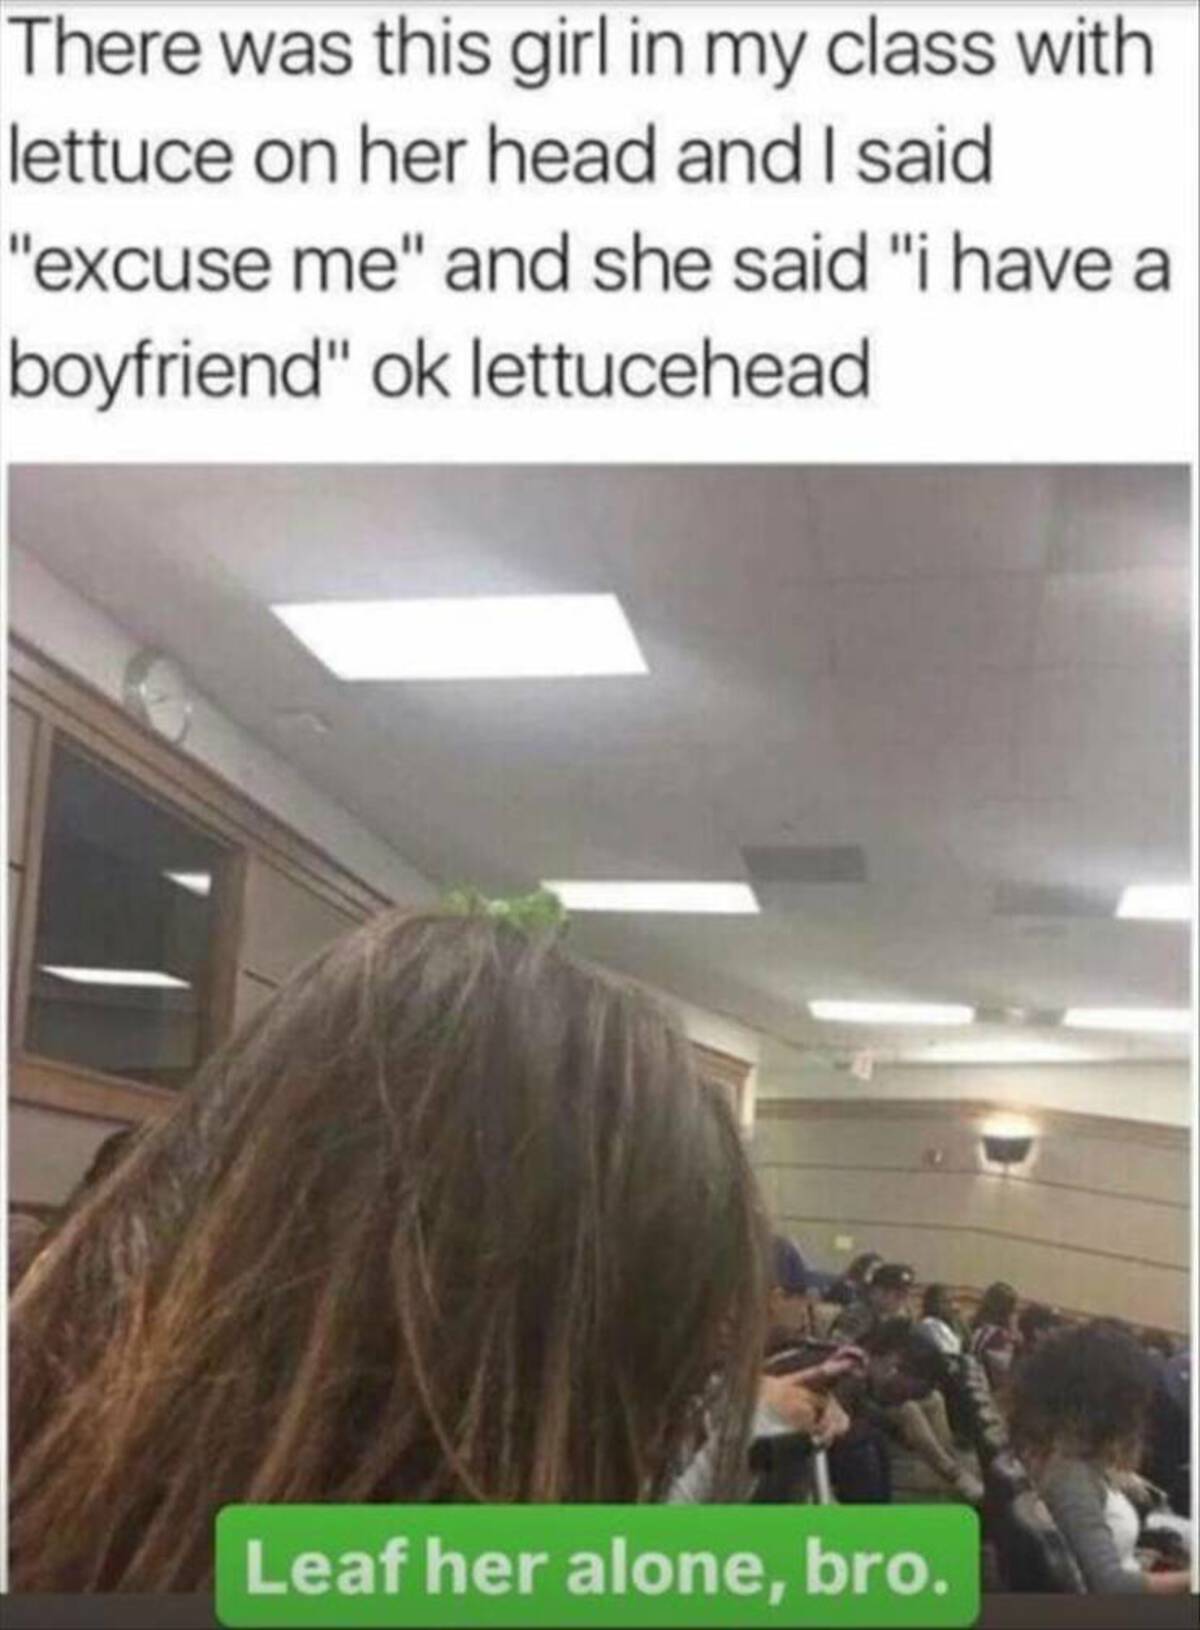 okay lettuce head meme - There was this girl in my class with lettuce on her head and I said "excuse me" and she said "i have a boyfriend" ok lettucehead. Leaf her alone, bro.